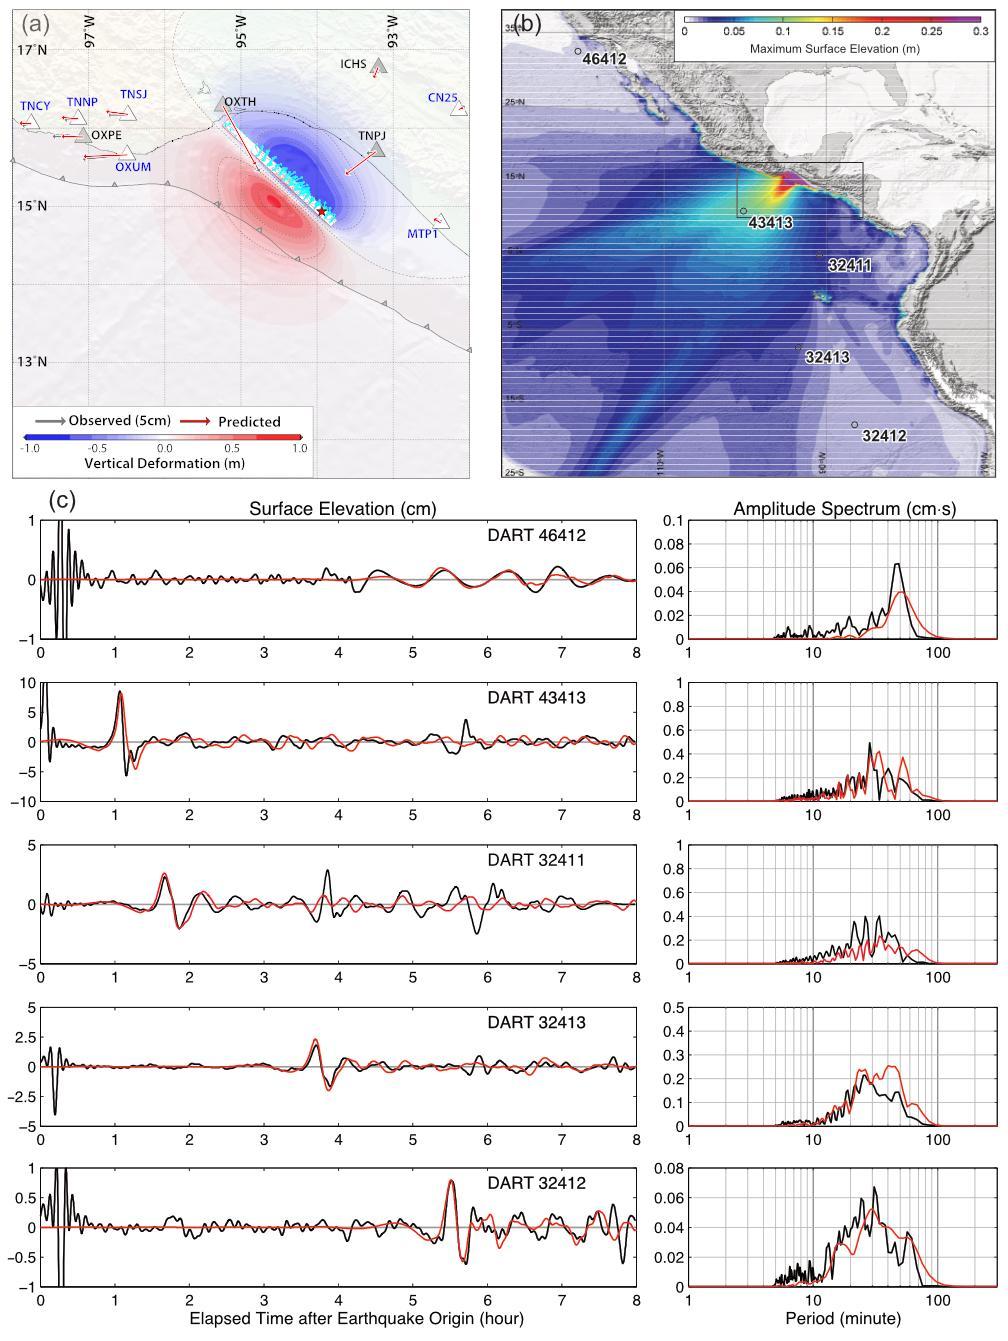 Figure 4. Comparison between observed and predicted GPS and tsunamis for our preferred slip model. (a) Black and red arrows show observed and predicted horizontal static motions at GPS stations.